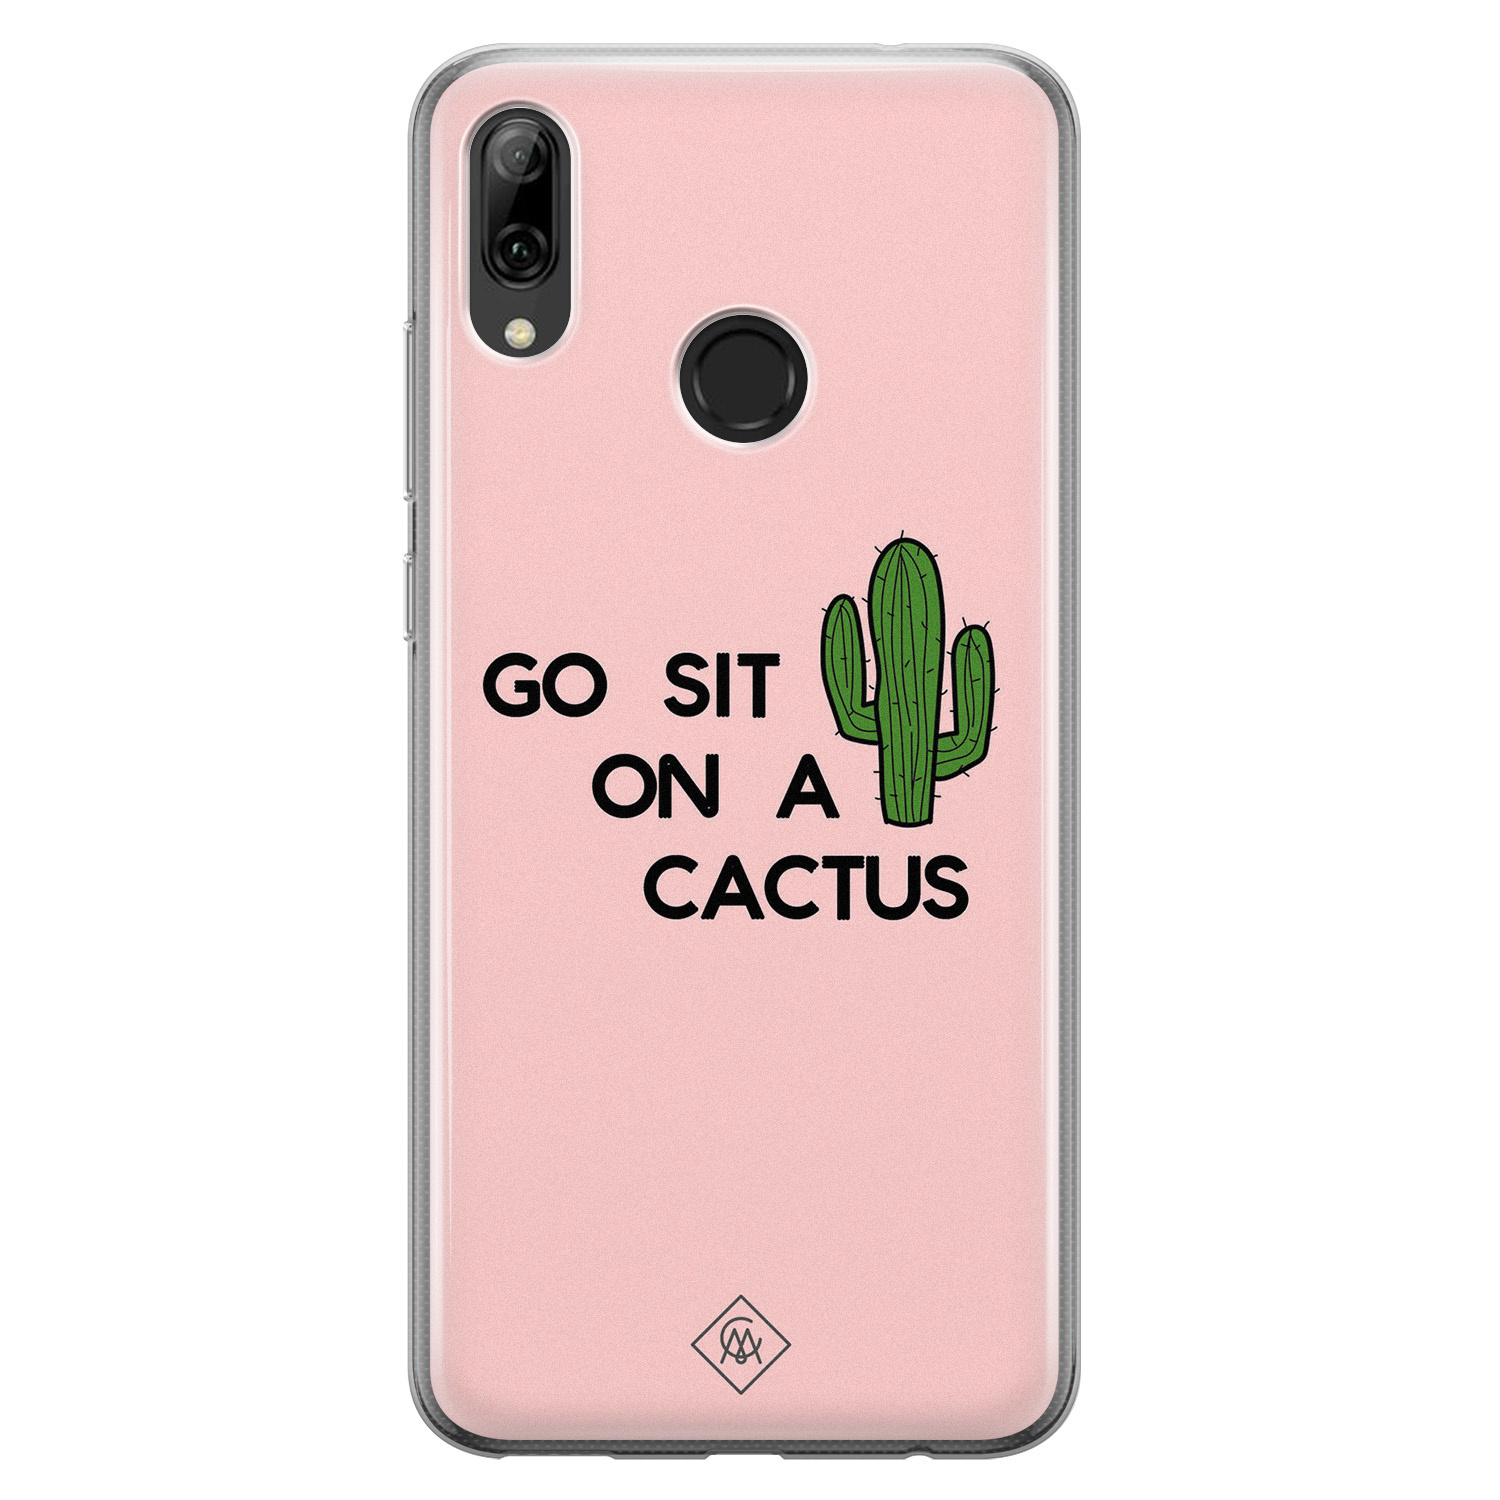 Huawei P Smart 2019 siliconen hoesje - Go sit on a cactus